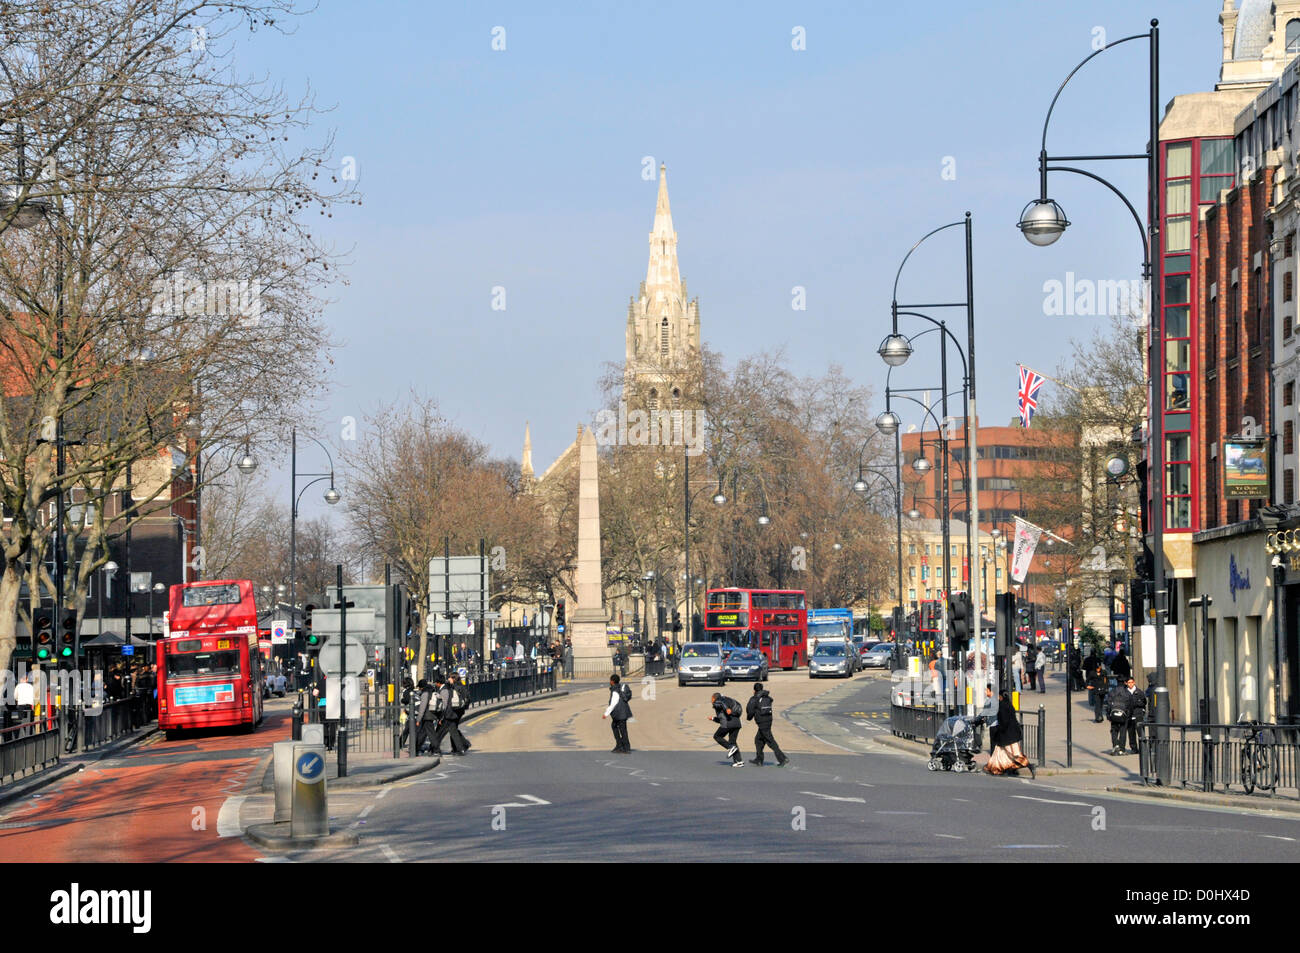 High Street Broadway one way traffic flow on the A11 road with spire of St Johns church Stratford Newham East London England UK Stock Photo